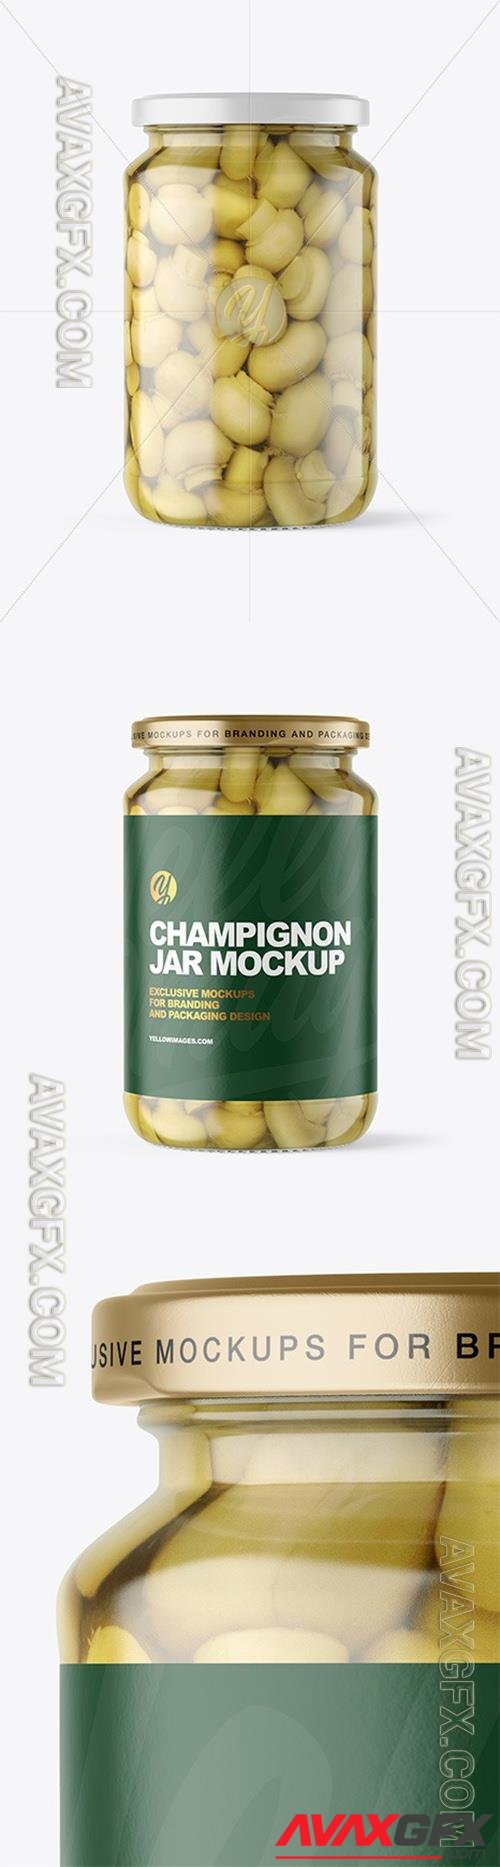 Clear Glass Jar with Champignons Mockup 97186 TIF